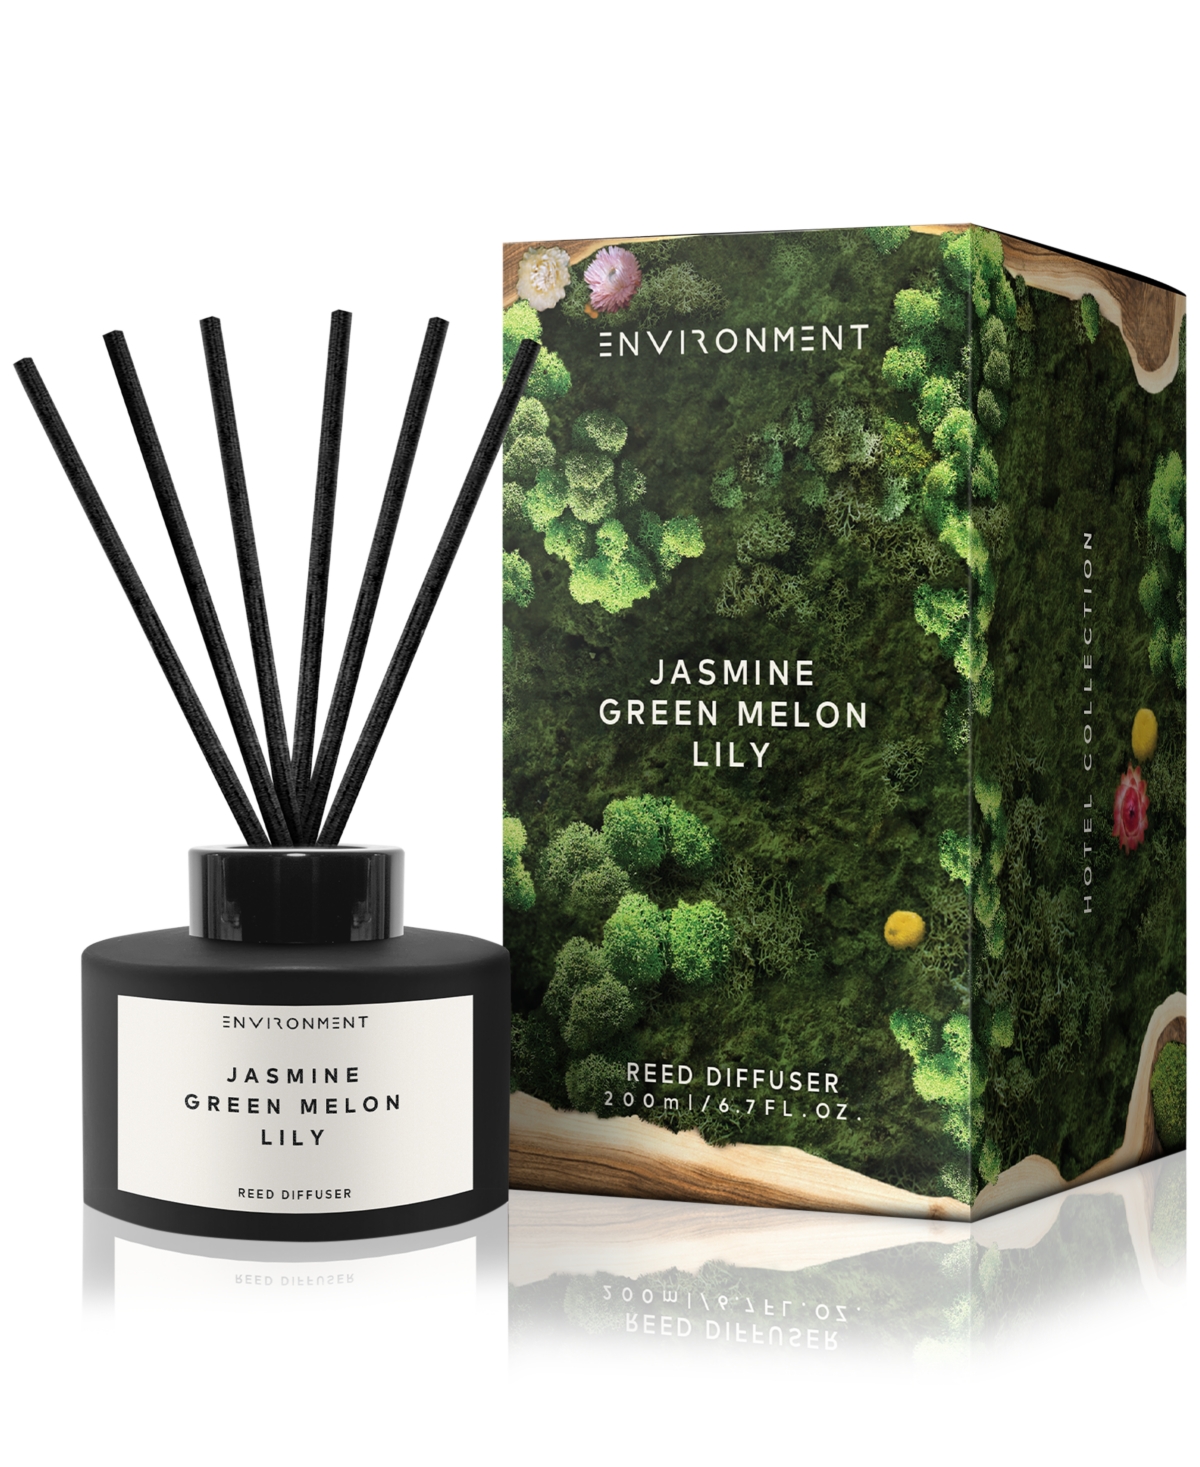 Jasmine, Green Melon & Lily Diffuser (Inspired by 5-Star Luxury Hotels), 6.7 oz.